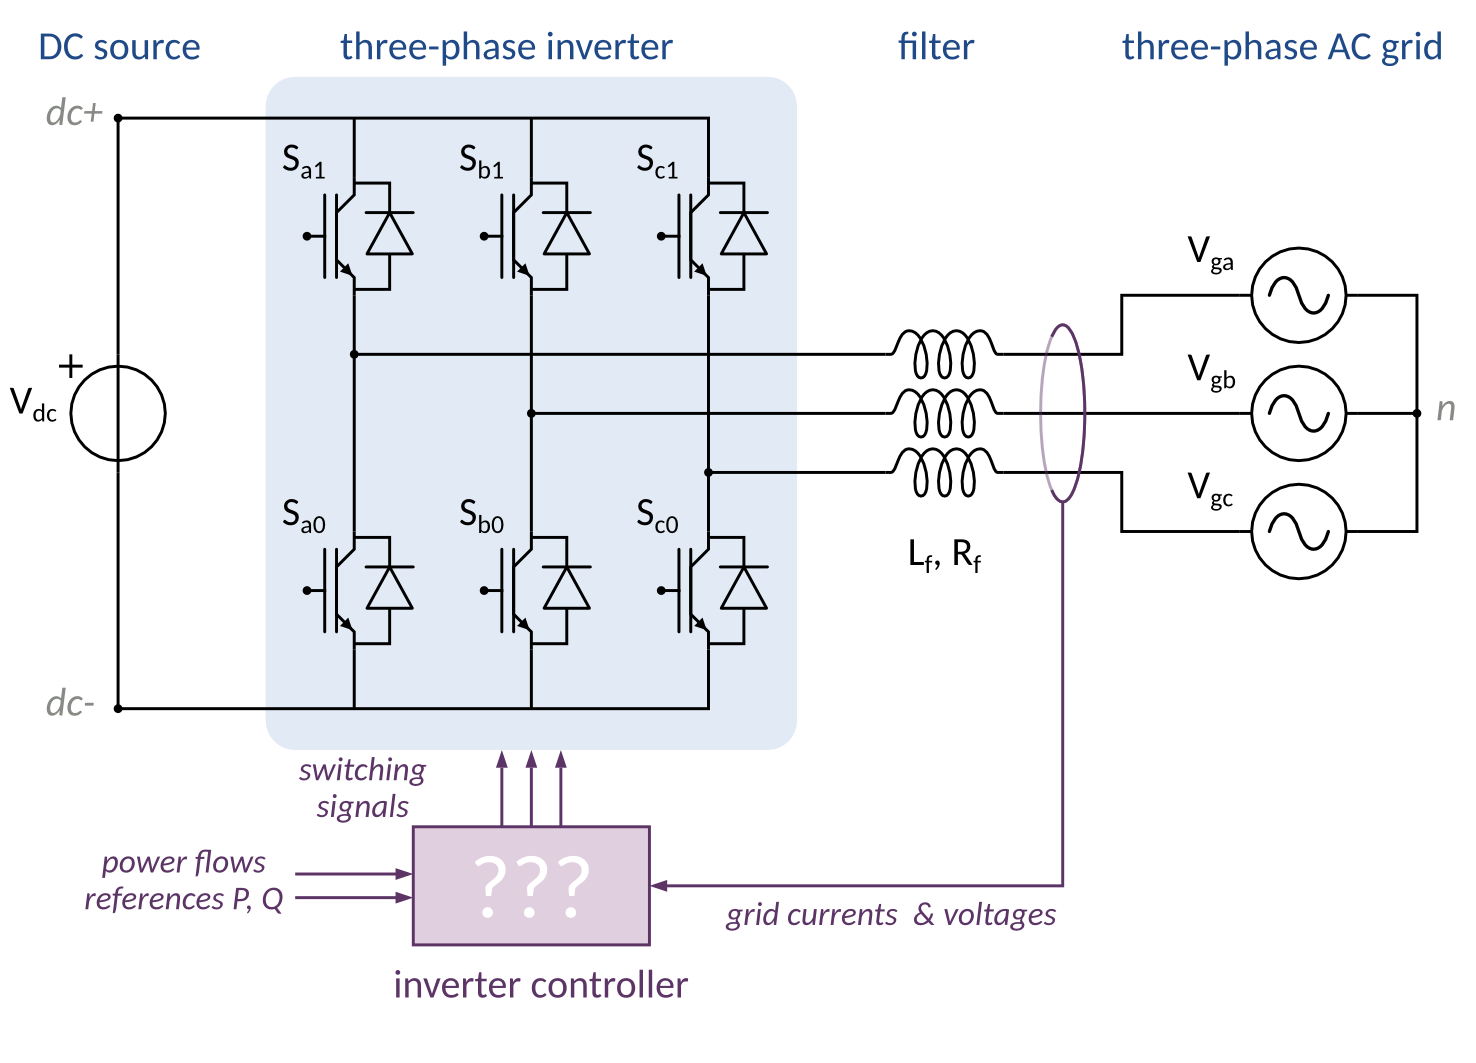 _images/grid_connected_inverter_control.png